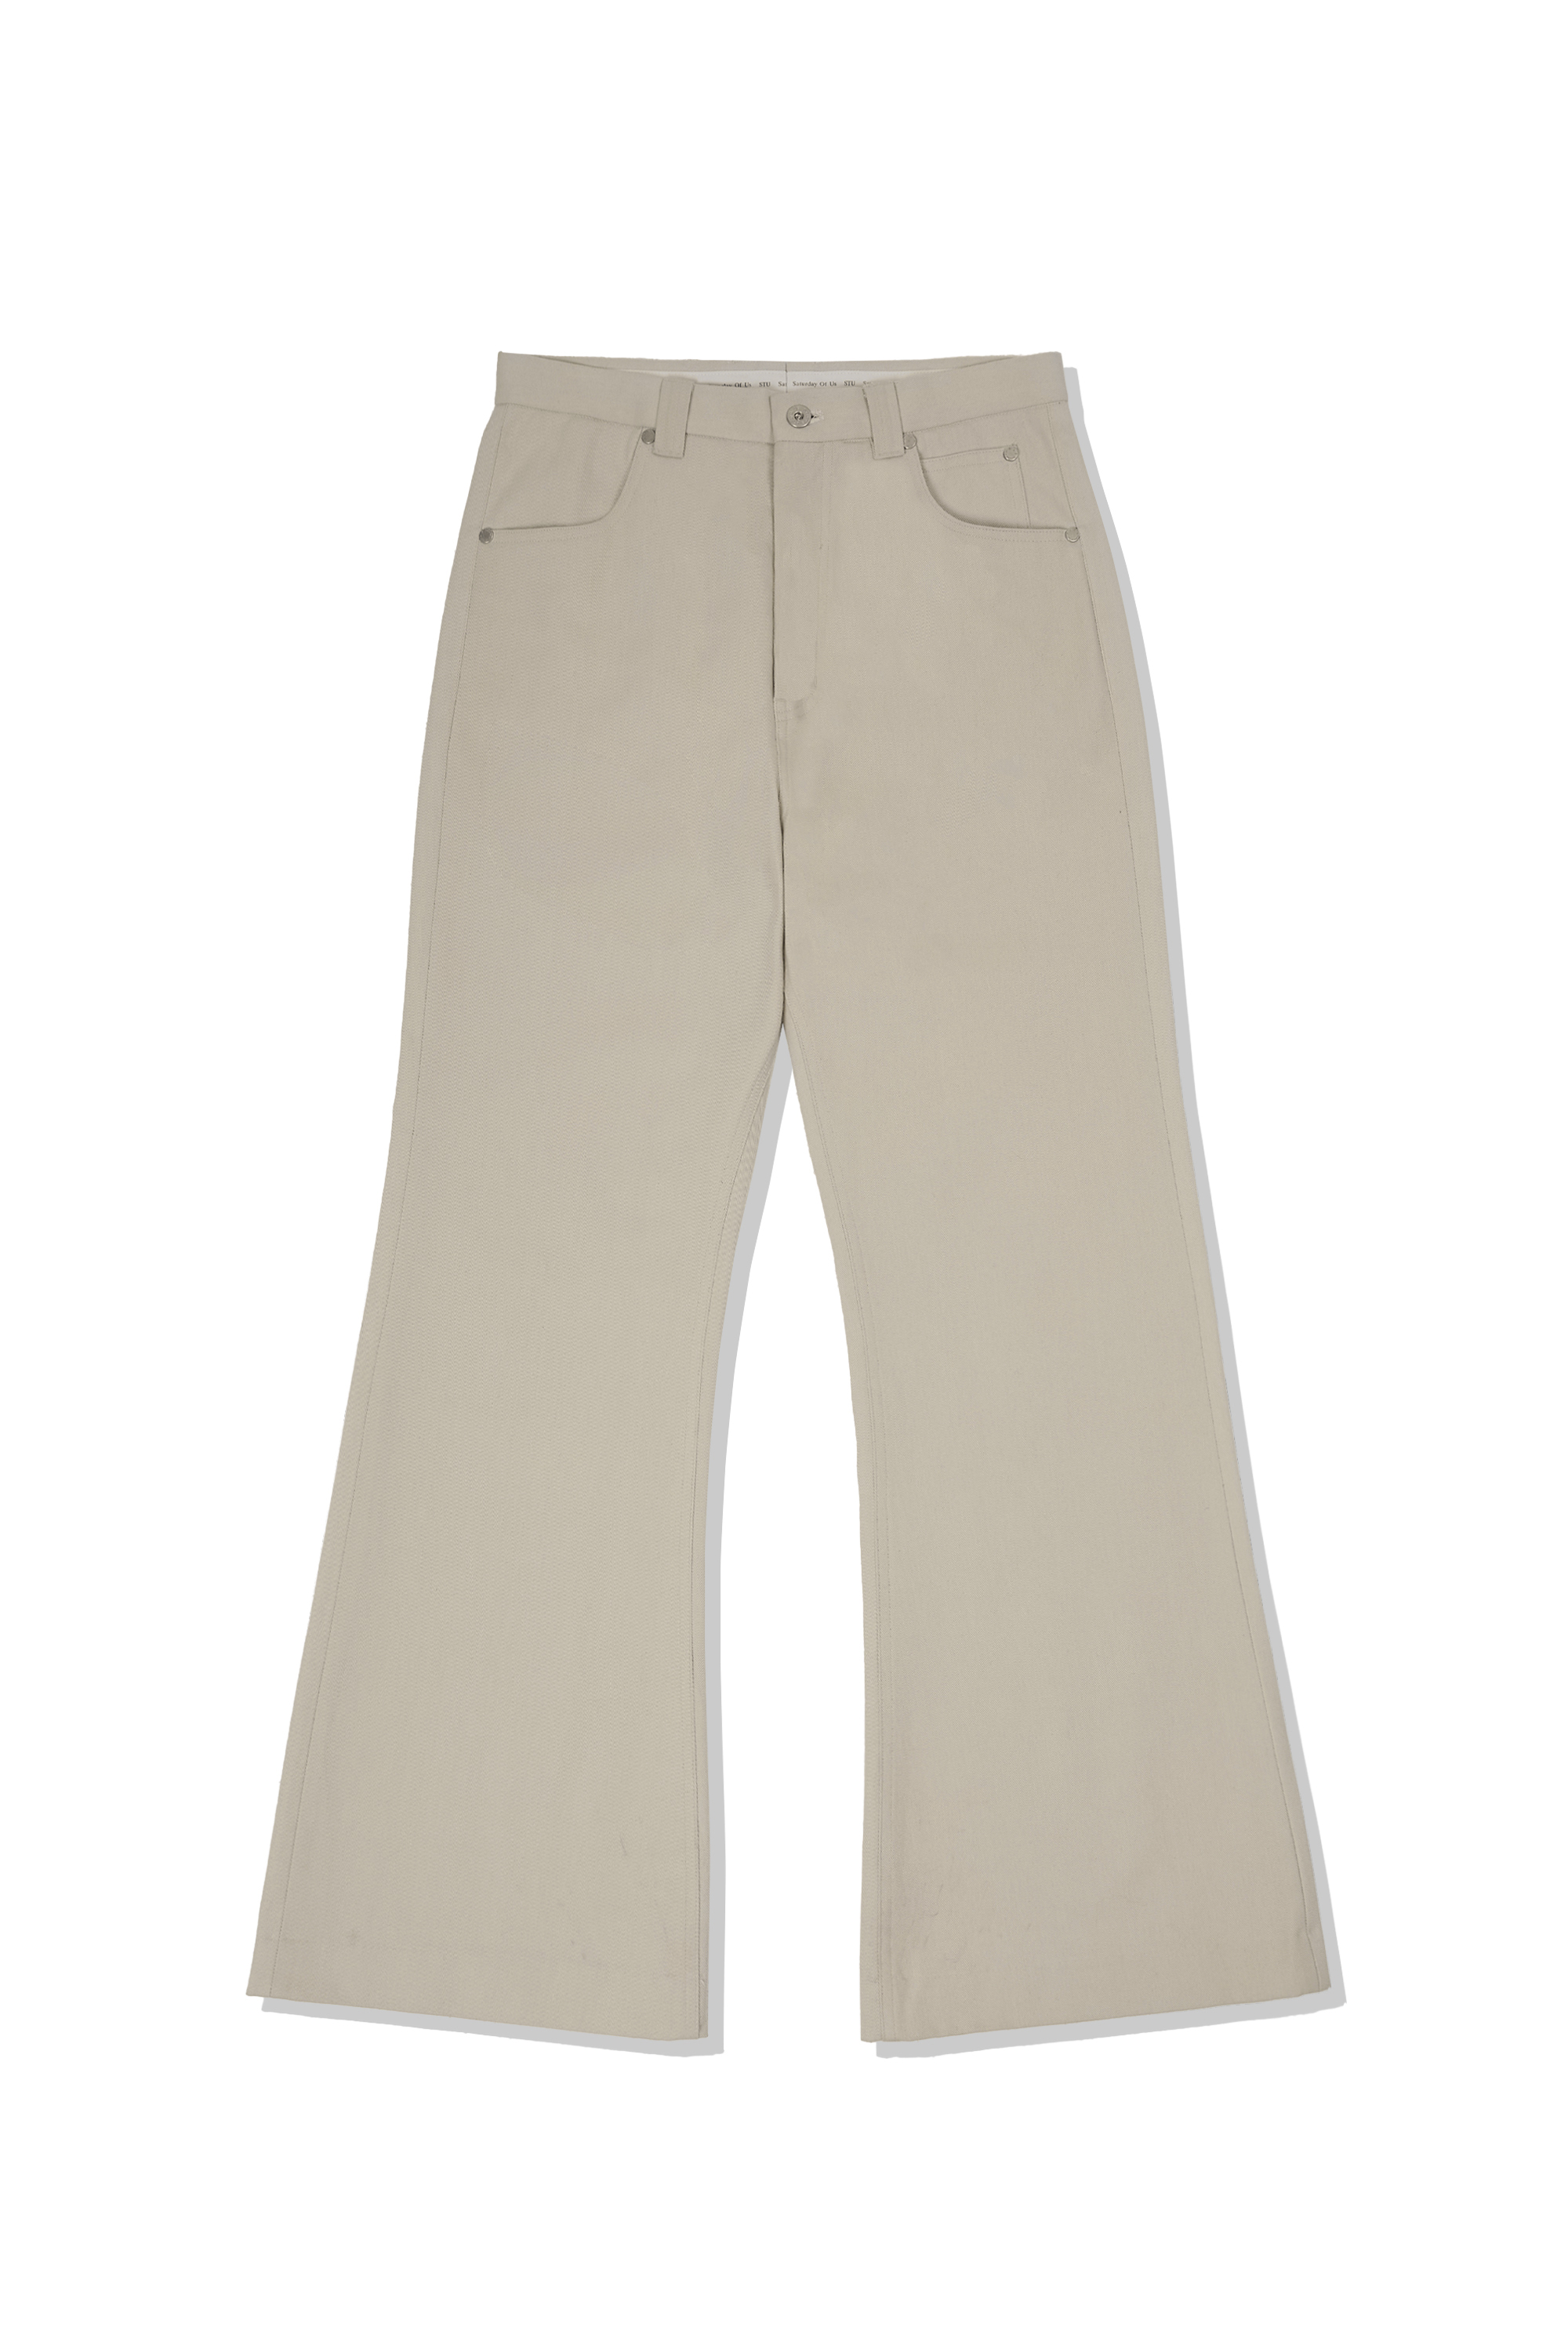 24 Spring Flared Cotton Pants Ivory